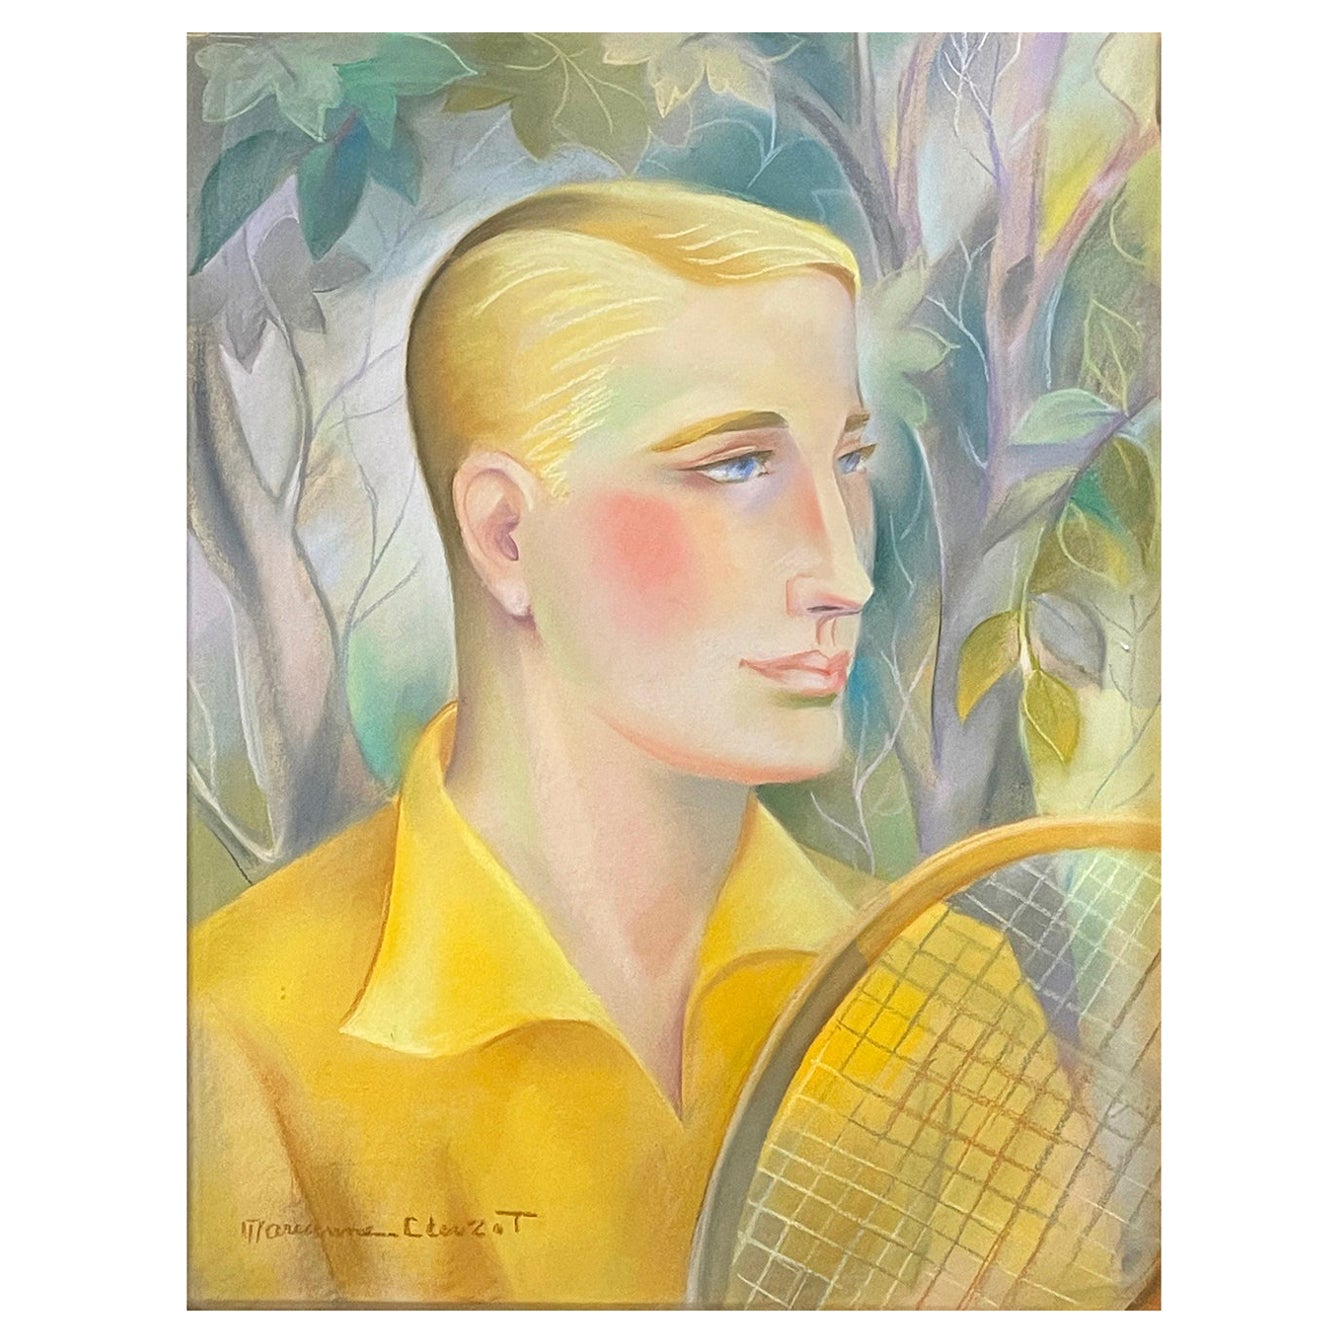 "Tennis Player in Canary Yellow, " Striking Art Deco Portrait of Blond Athlete